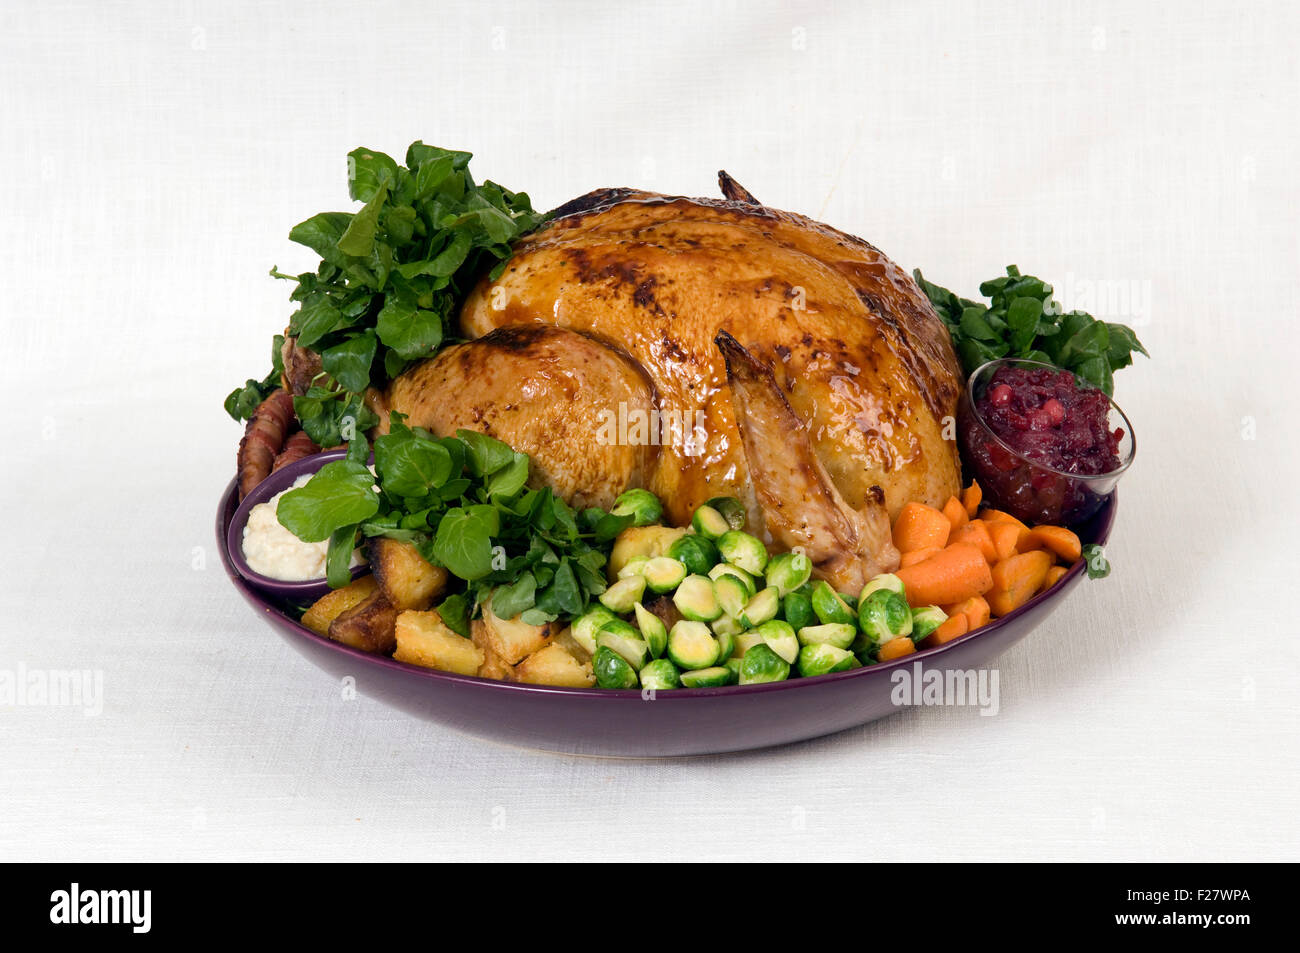 A Christmas roast turkey dinner with roast potatoes, chestnut stuffing, parsnips, cranberry sauce, bread sauce and vegetables.UK Stock Photo